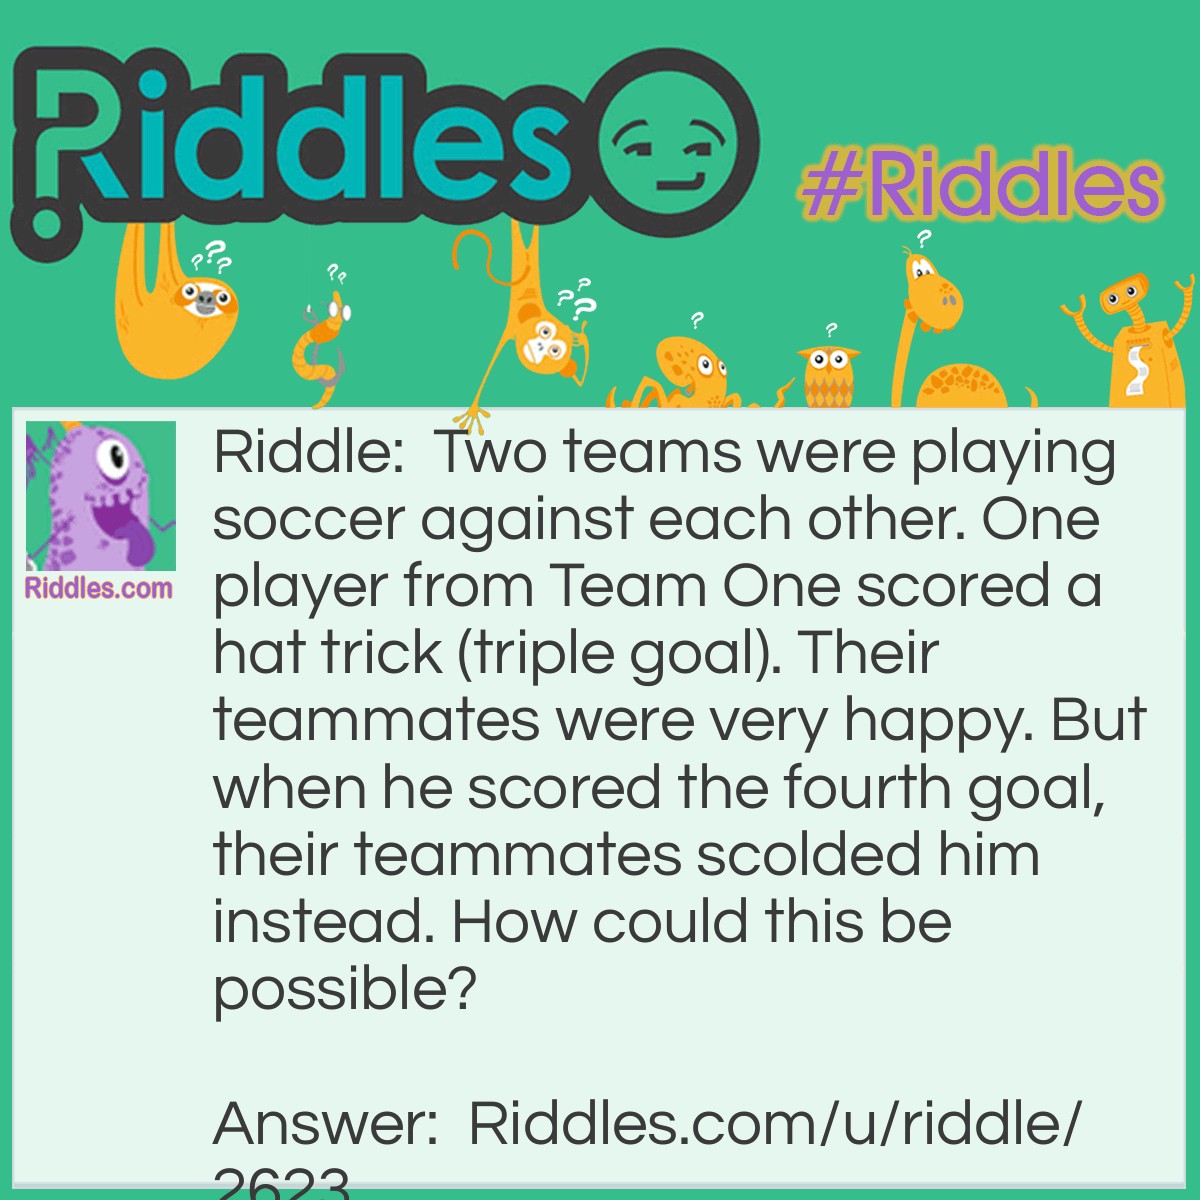 Riddle: Two teams were playing soccer against each other. One player from Team One scored a hat trick (triple goal). Their teammates were very happy. But when he scored the fourth goal,their teammates scolded him instead. How could this be possible? Answer: The player scored an own goal.